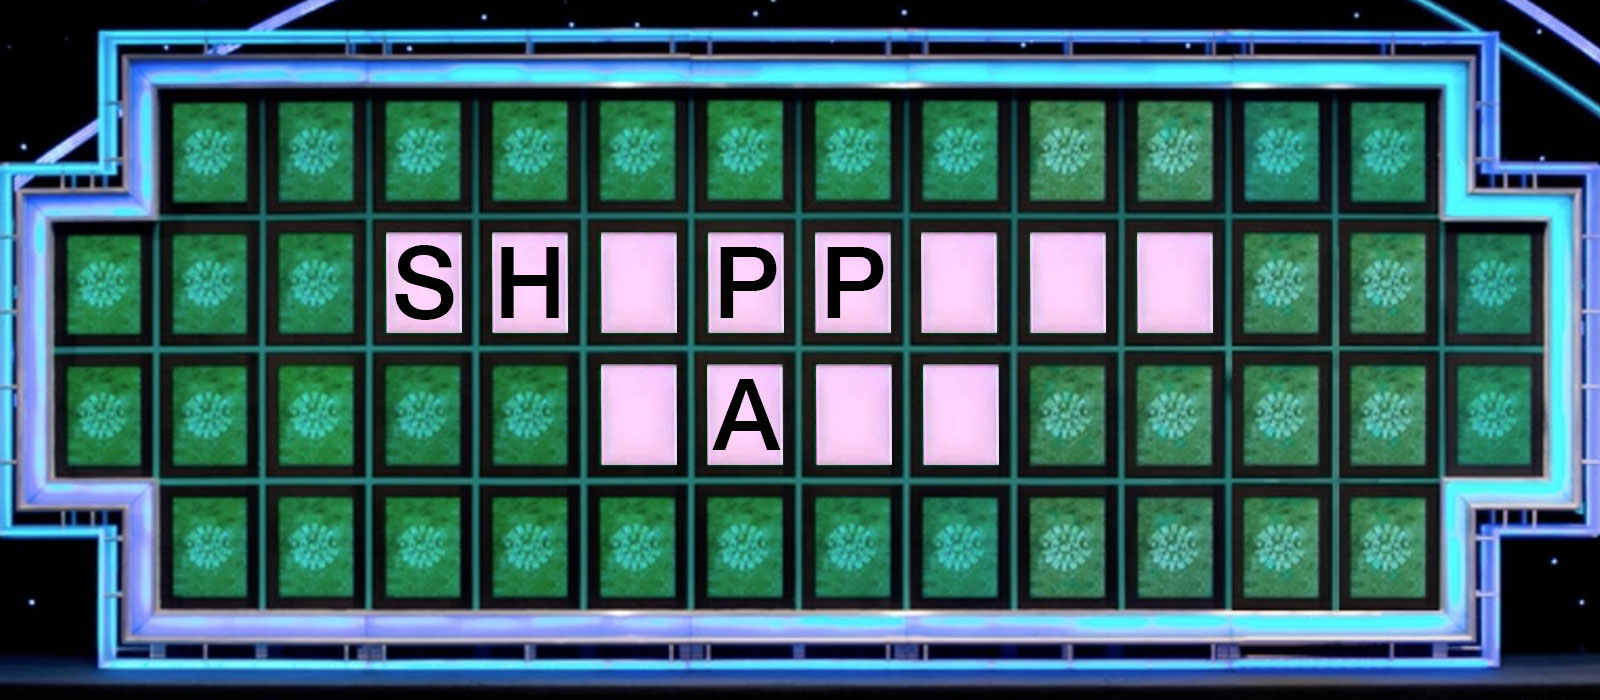 Can You Solve These Wheel of Fortune Puzzles? 518